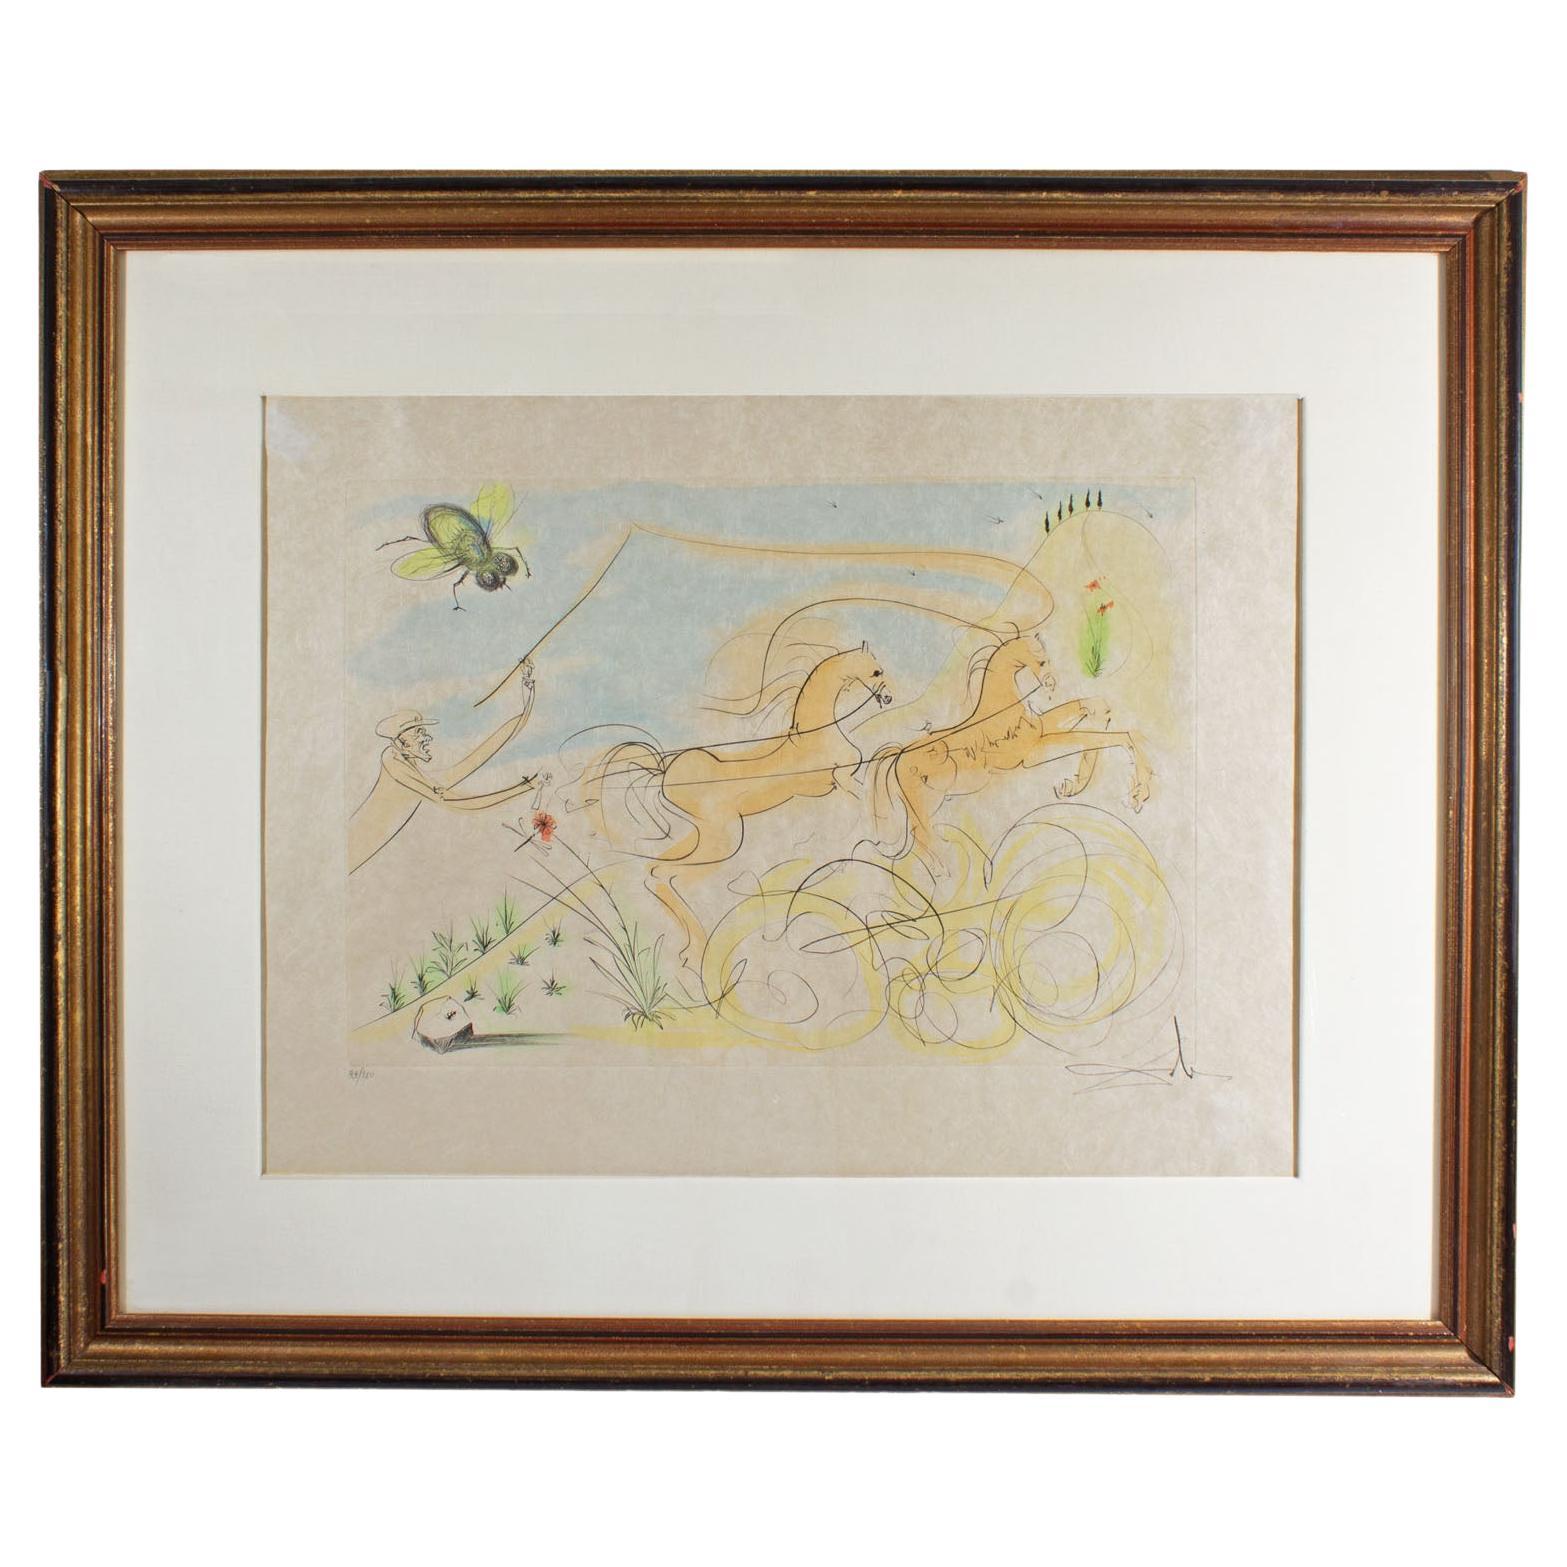 Salvador Dali Signed 1974 “The Coach and the Fly” Drypoint Etching with Pochoir 